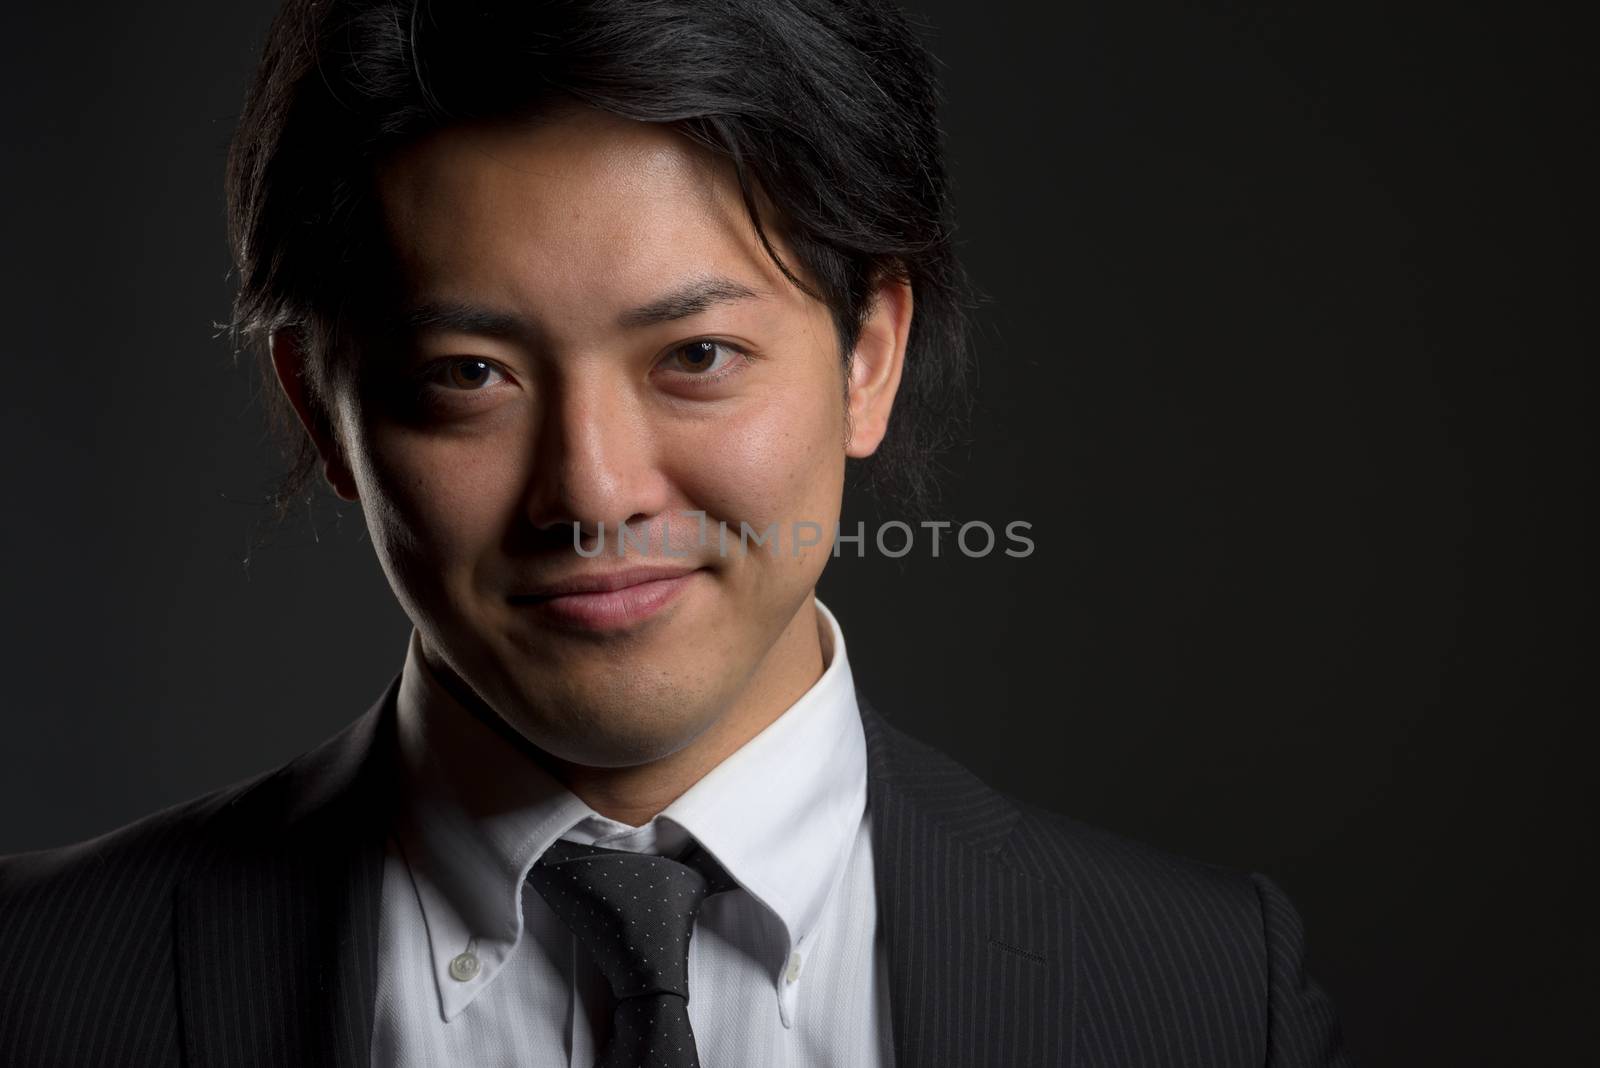 Dark and Smiling Asian Male Portrait by justtscott